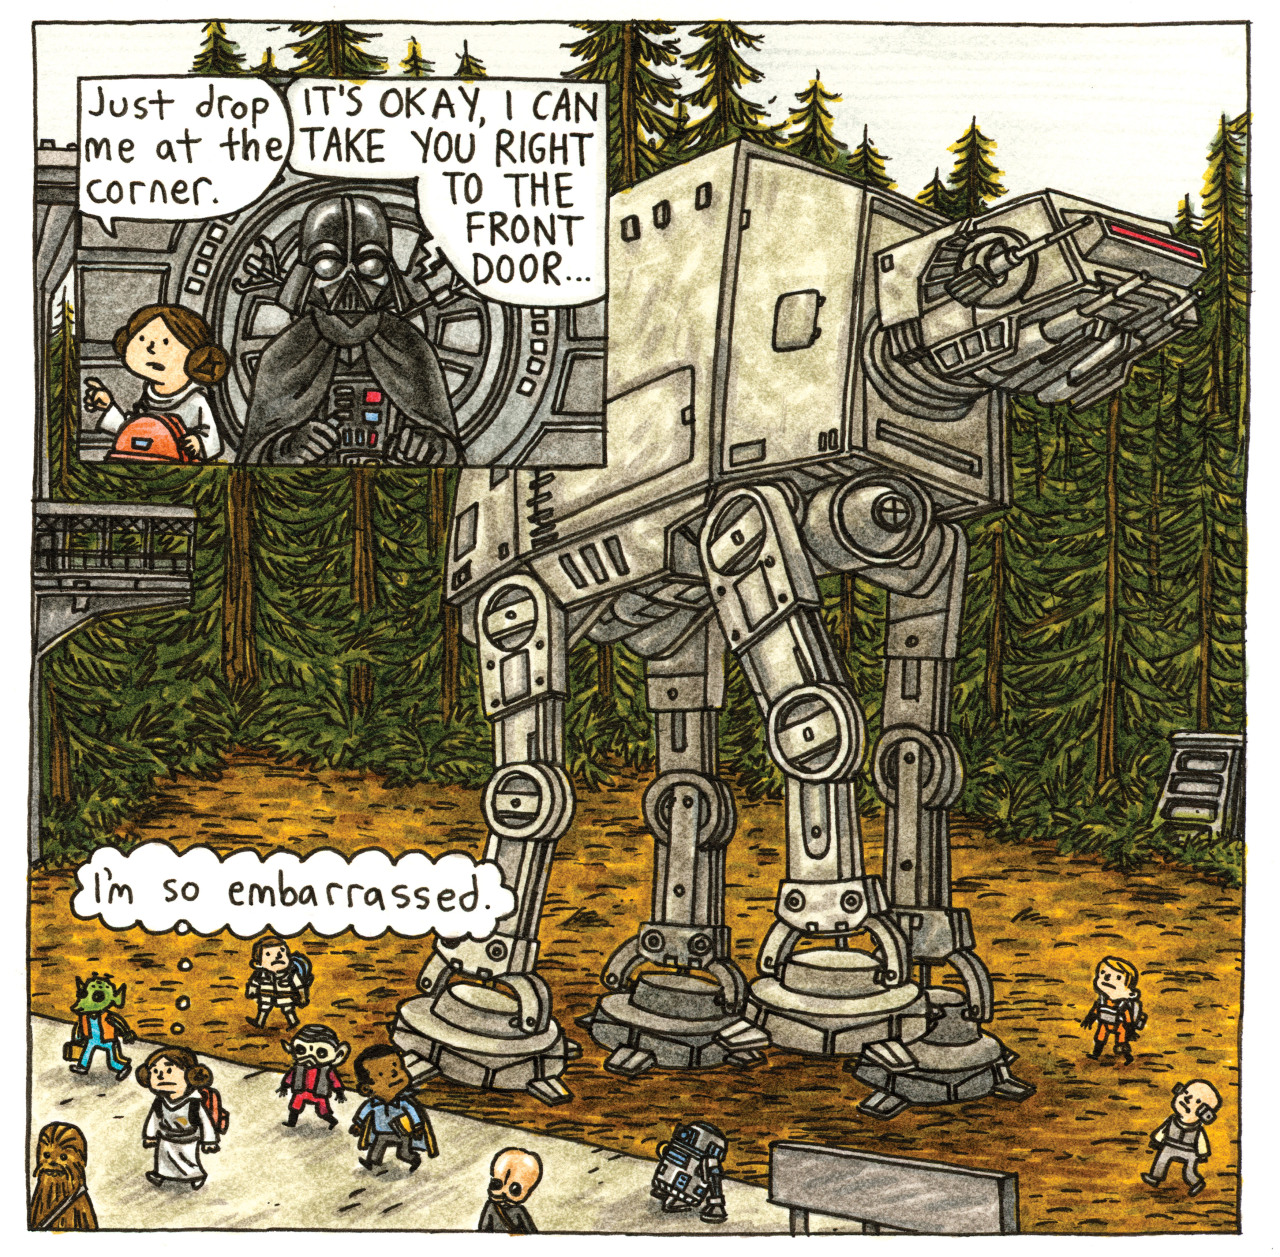 brain-food:  Jeffrey Brown had one of the biggest hits of his career with last year’s Darth